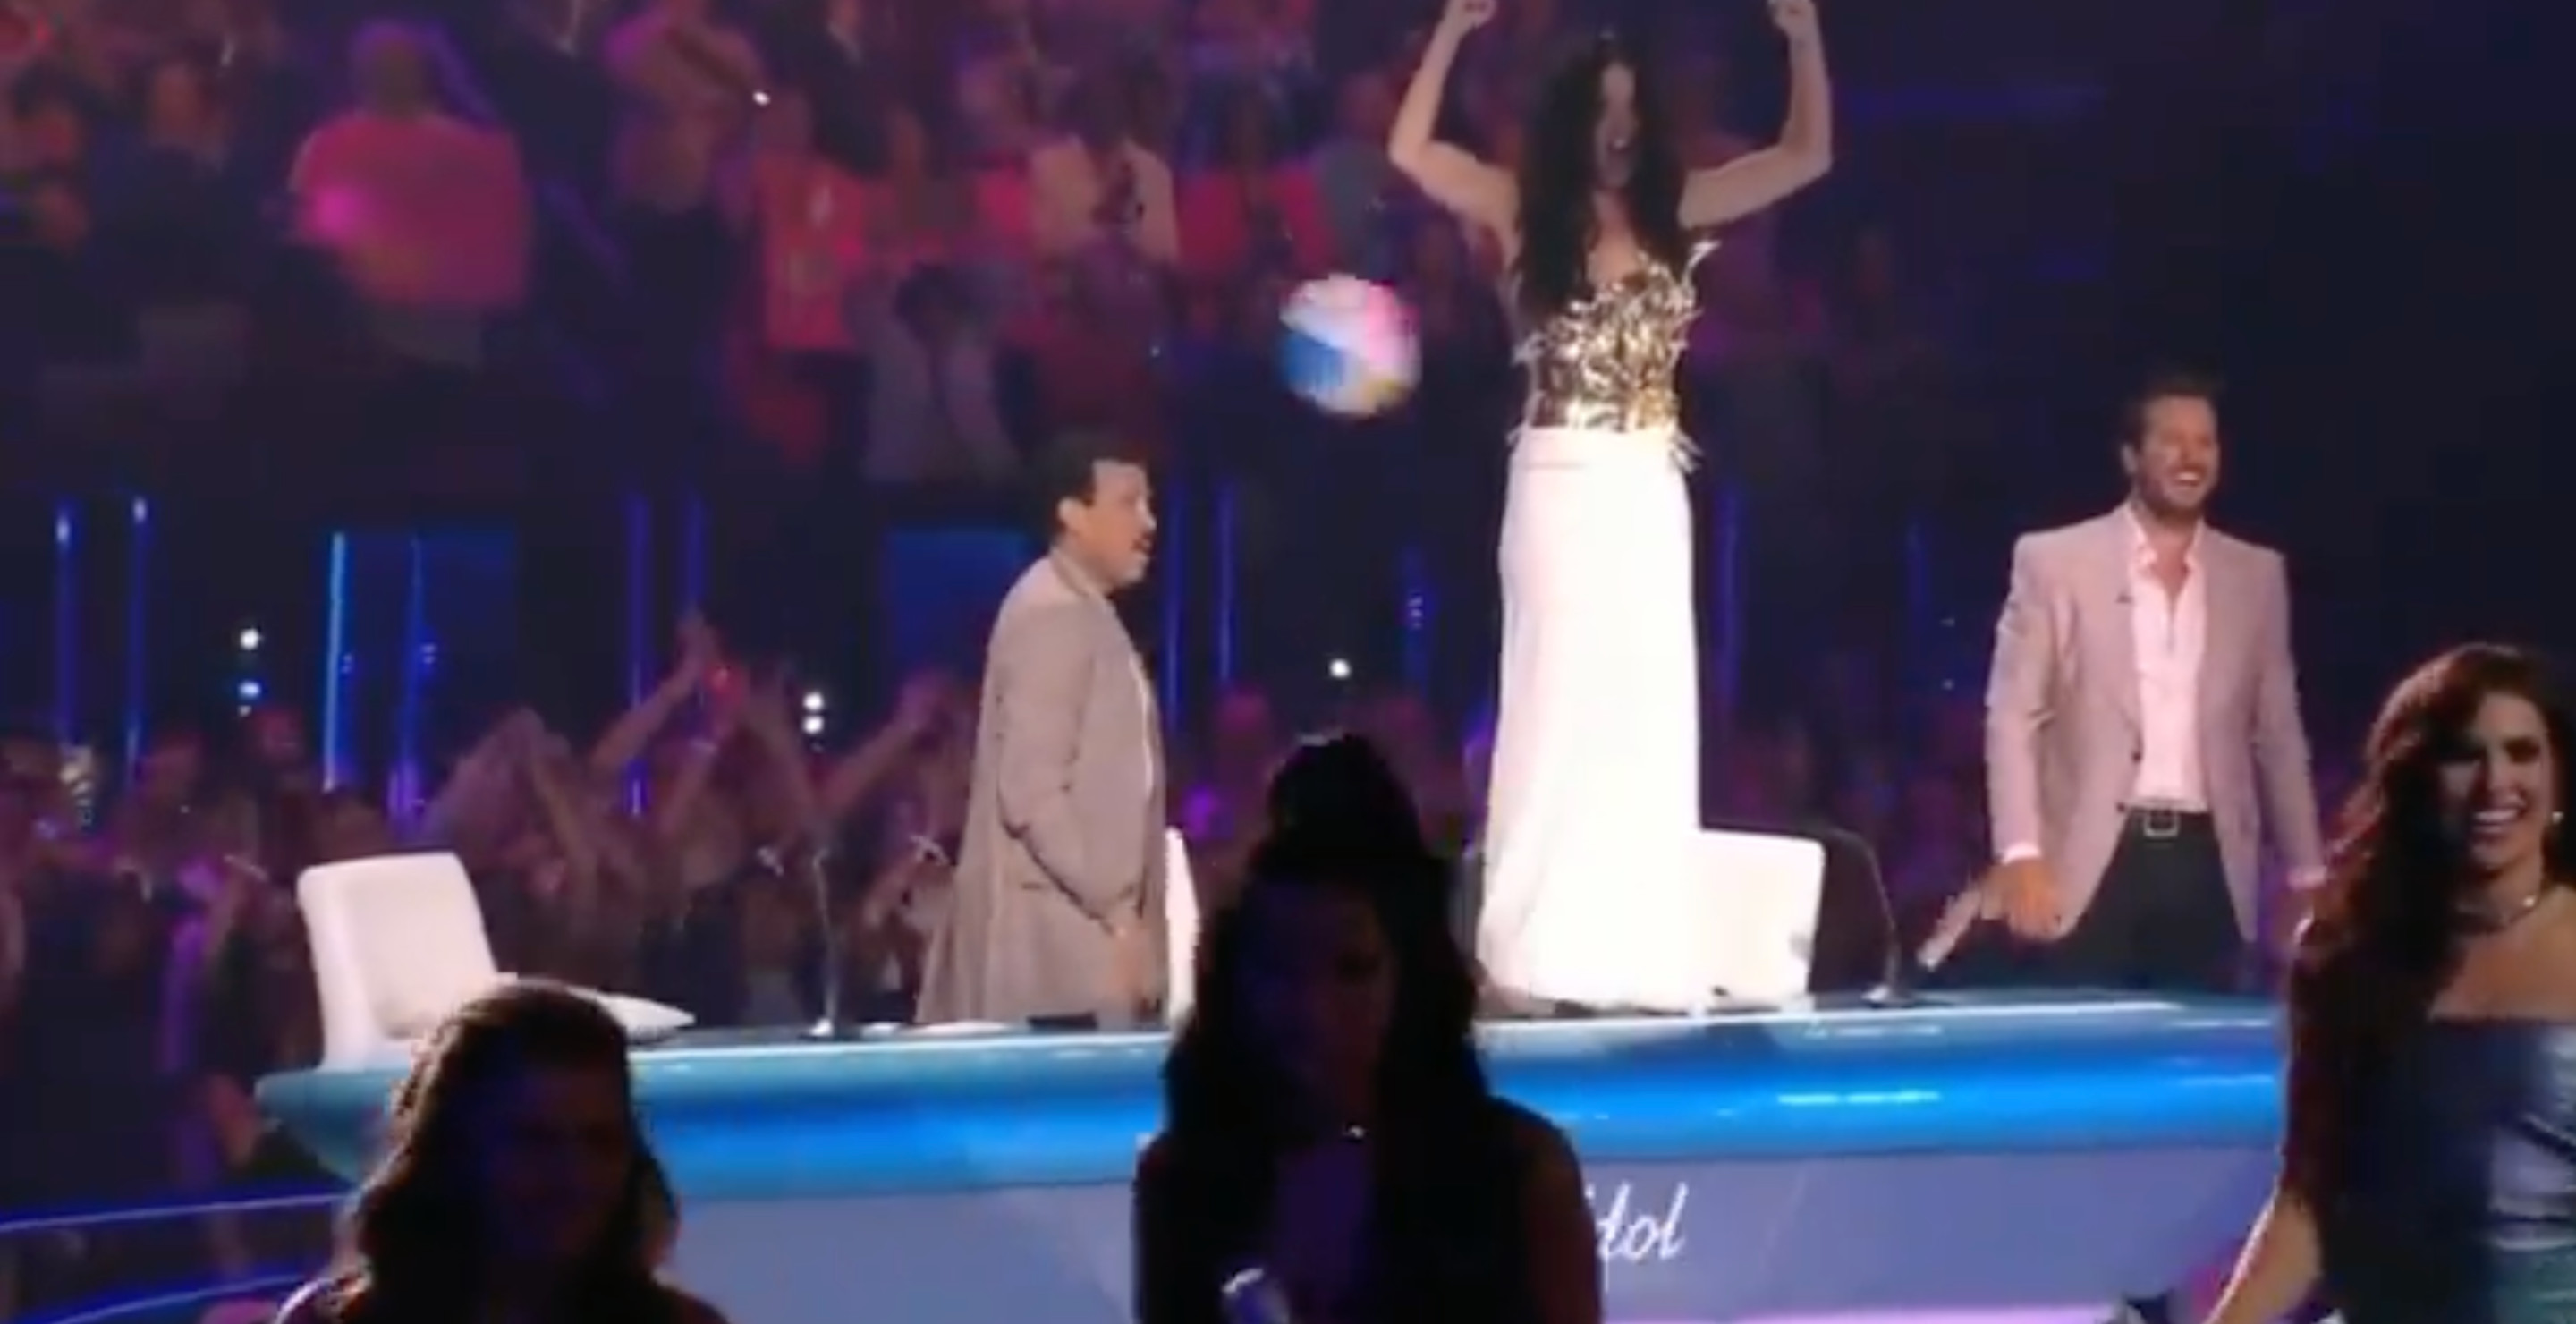 'American Idol' Tribute To Katy Perry Has Her Standing On The Judges Table